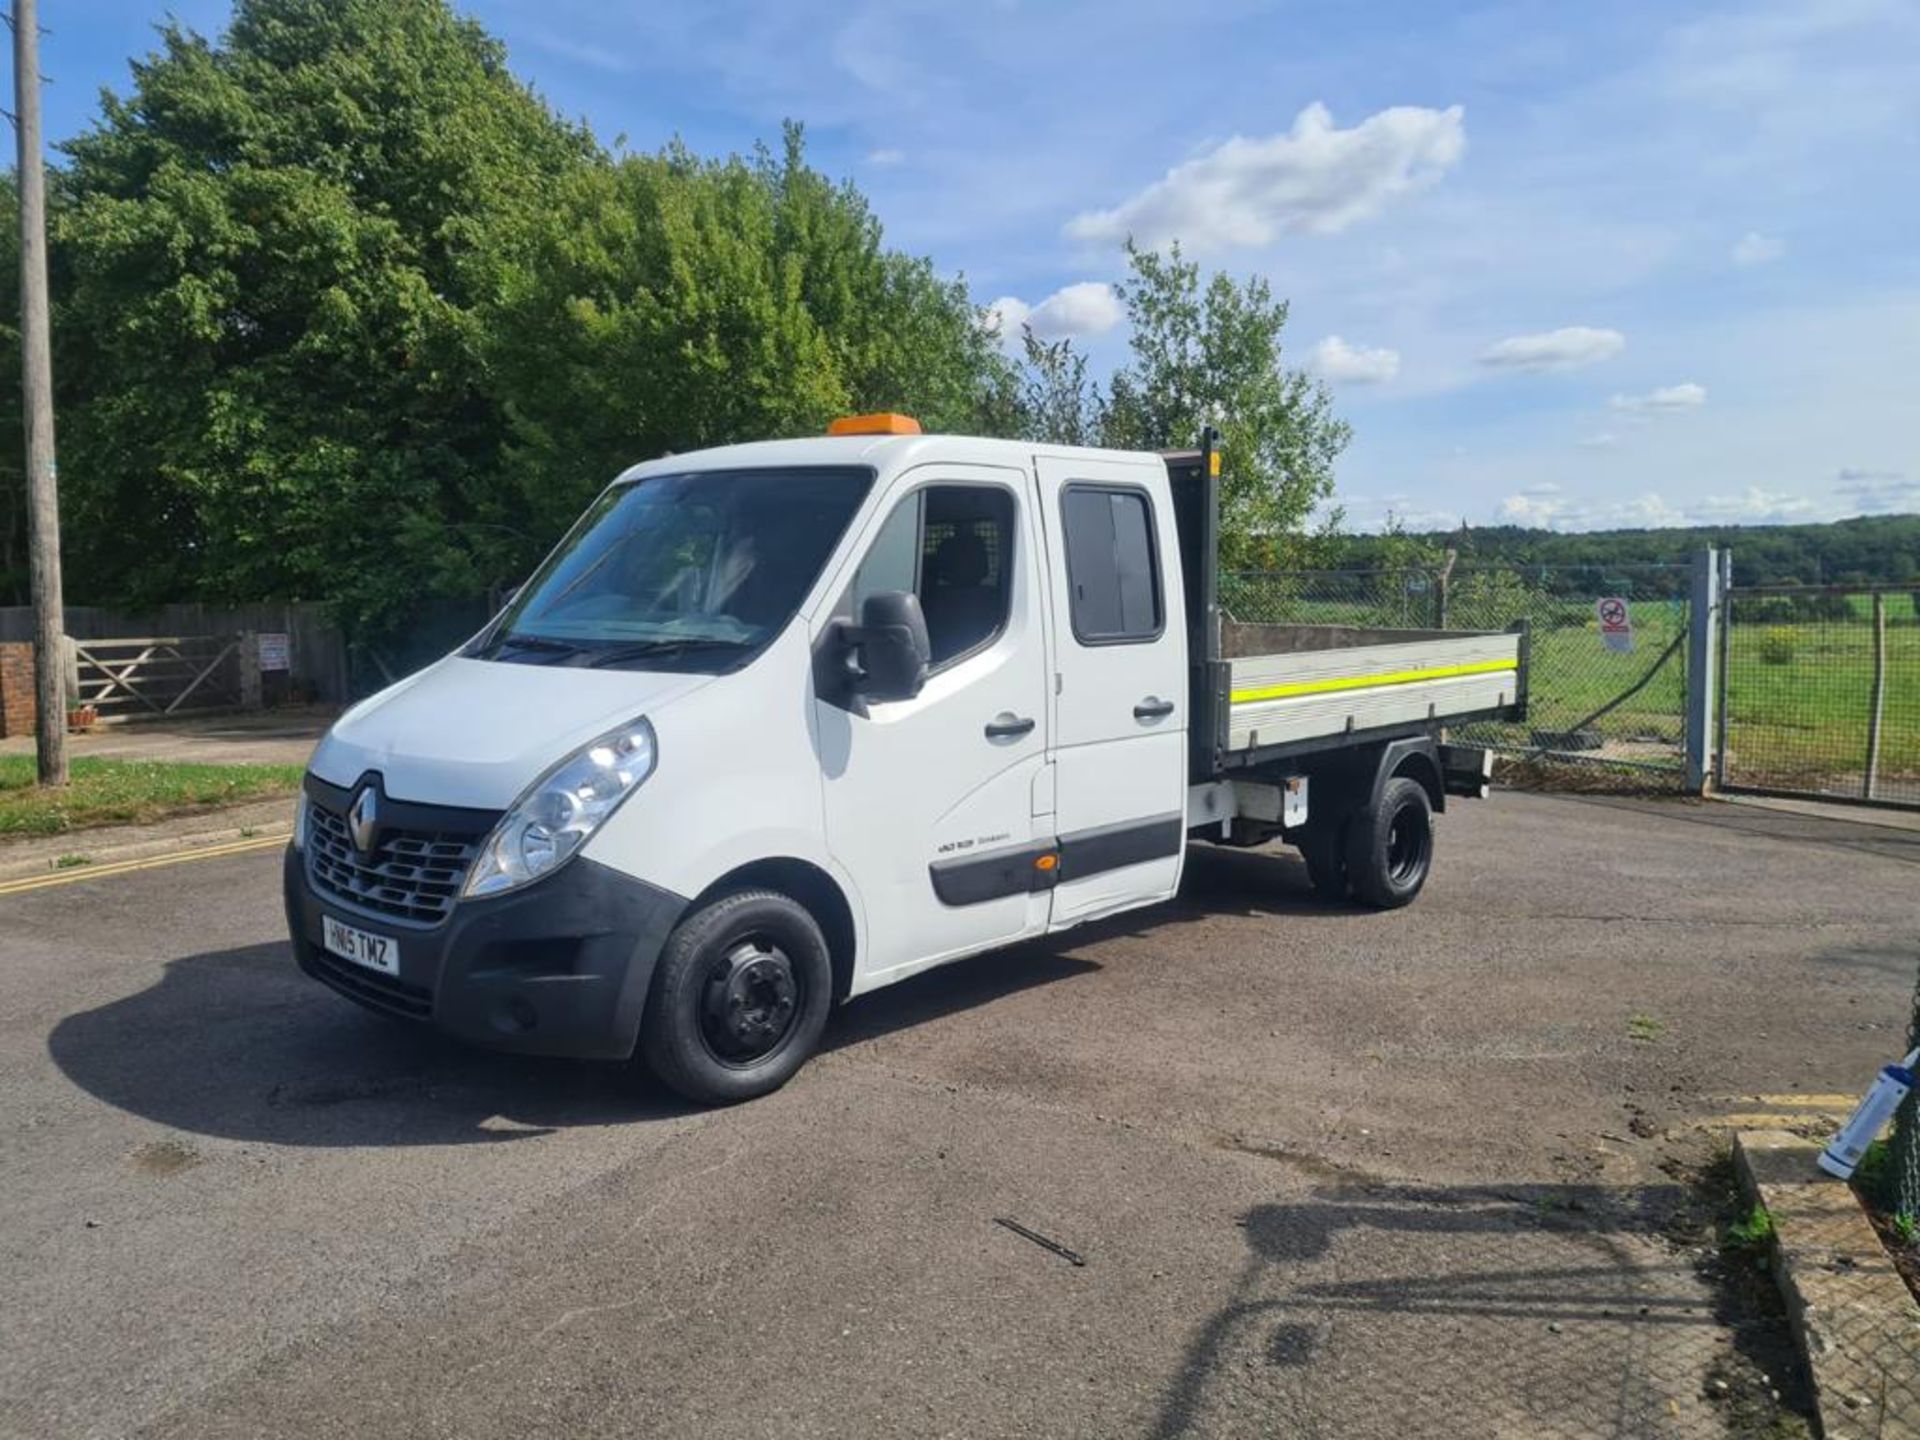 2015 RENAULT MASTER LL35 BUSINESS DCI DRW TIPPER TRUCK *NO VAT* - Image 2 of 16